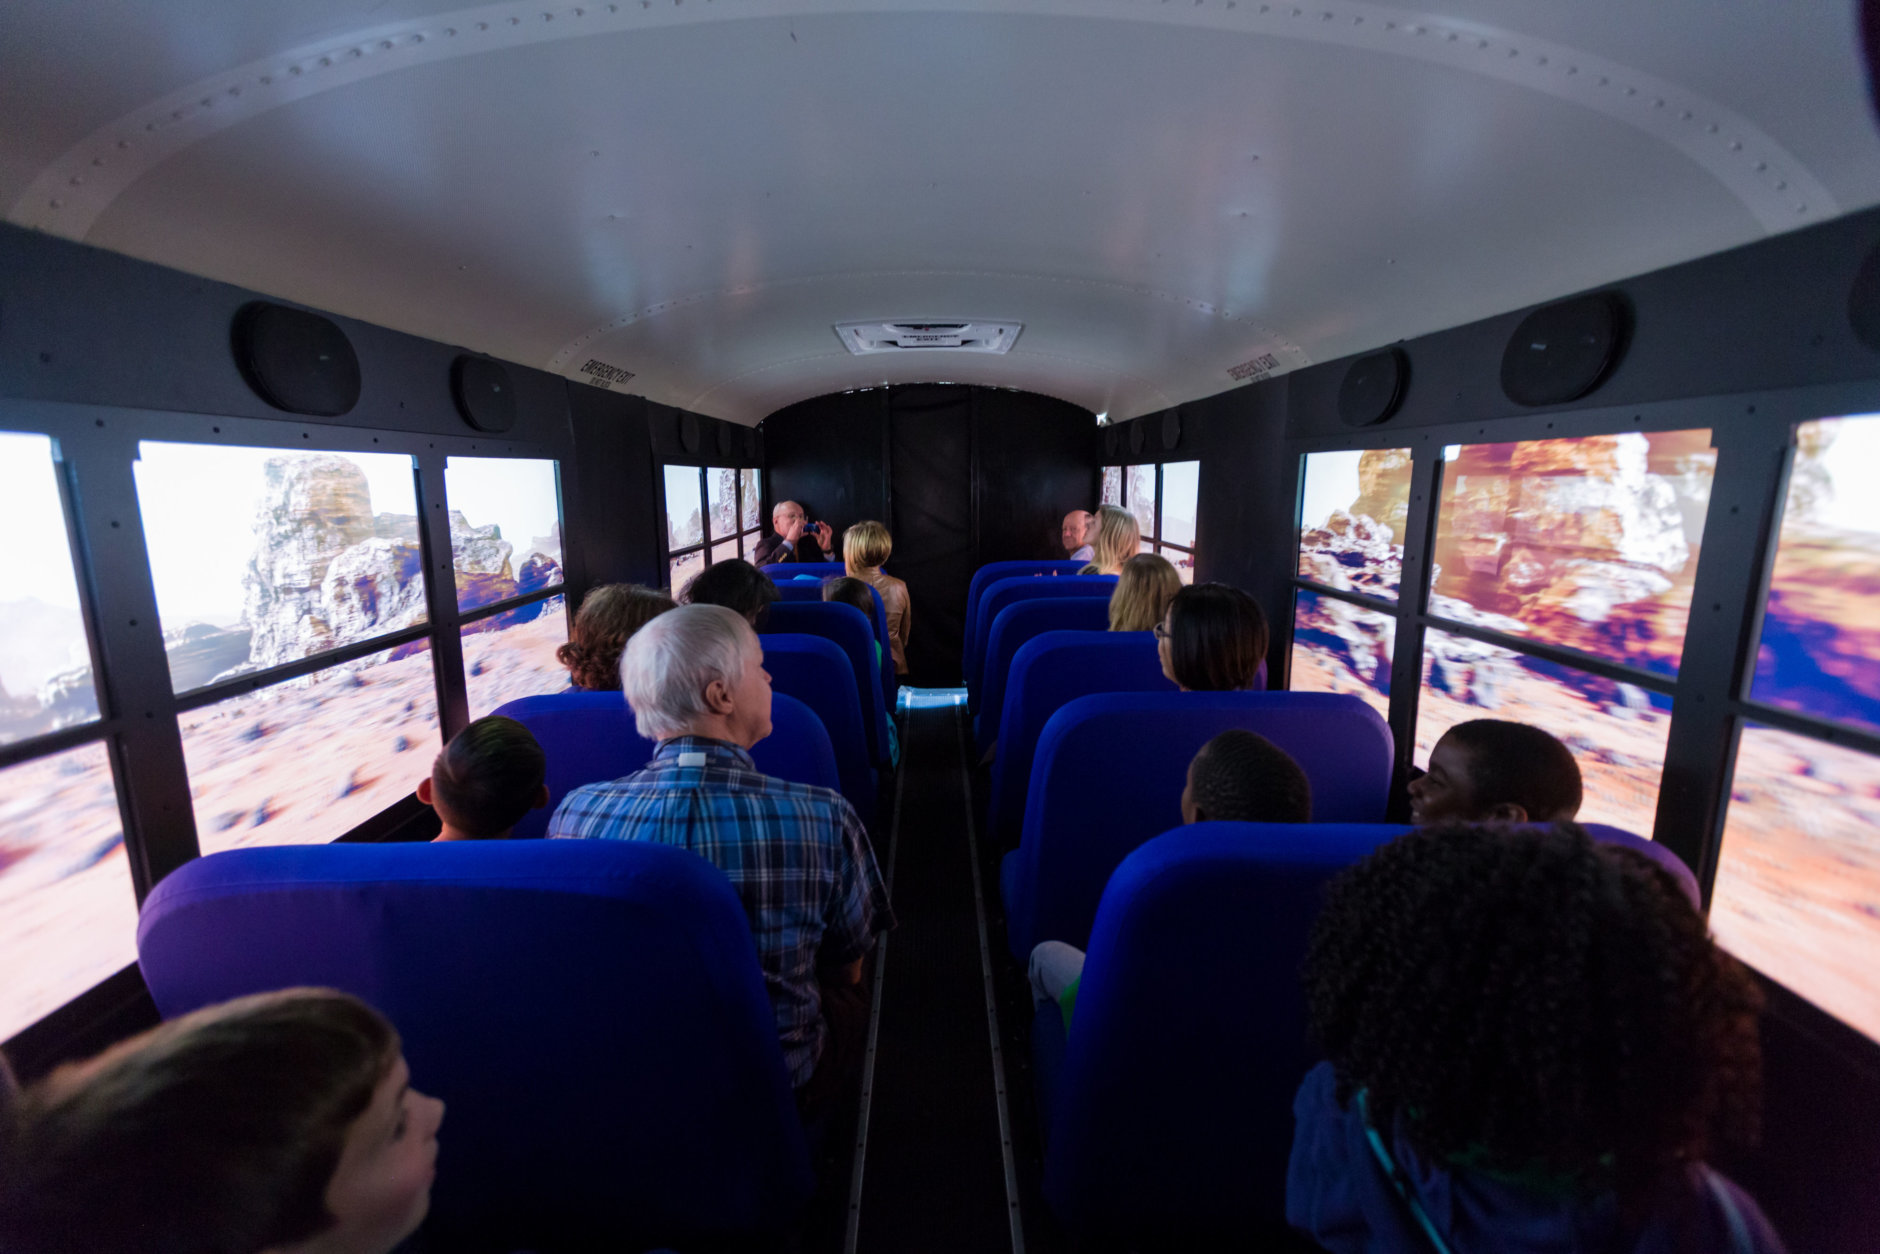 Students and chaperones from Virginia's Loch Lomond Elementary School robotics team watch as they seem to travel across the surface of the planet Mars, seated in the Lockheed Martin Mars Experience bus at the the Steven F. Udvar-Hazy Center, in Chantilly, Oct. 19, 2018. The bus, fitted with high-definition monitors on the windows, provides visitors an opportunity to experience the Martian surface. (Air and Space photo by Daniel Soñé)